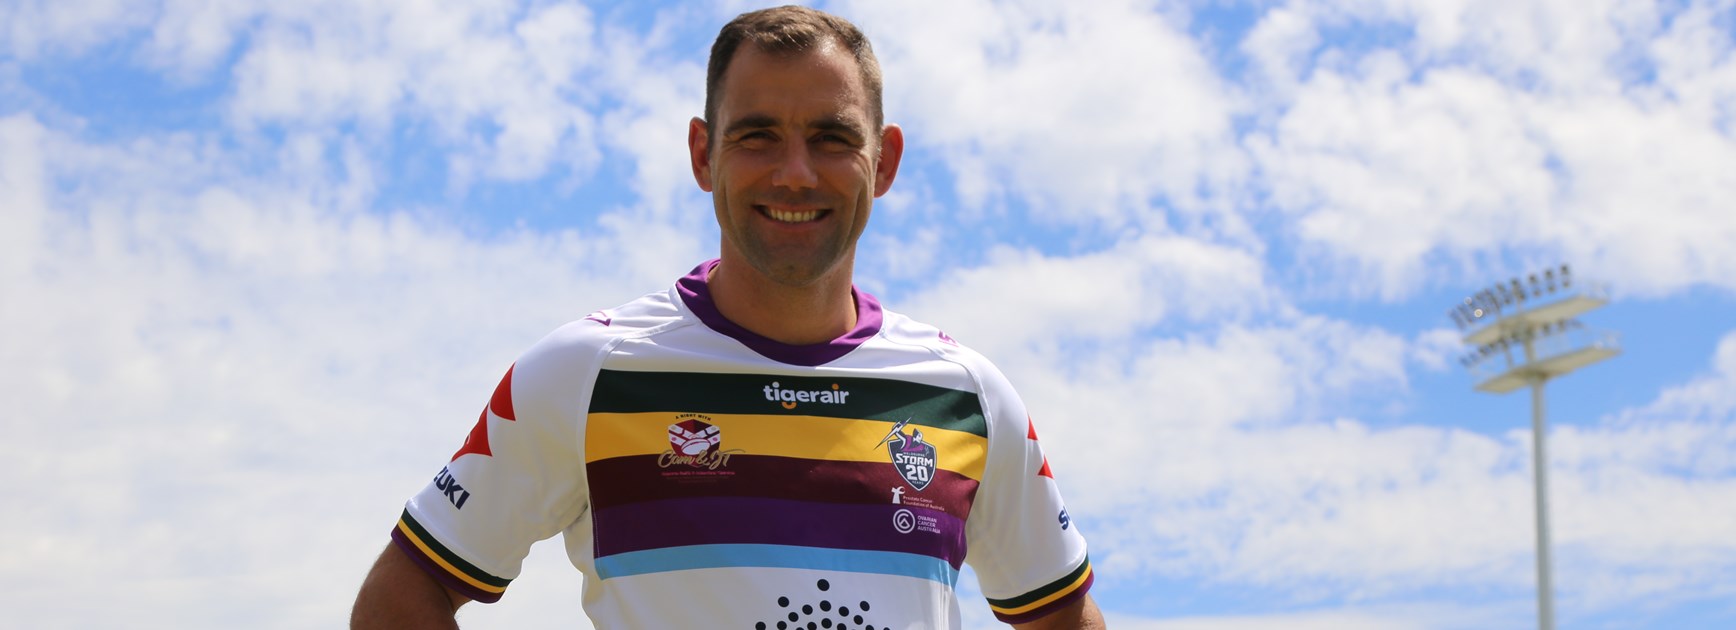 Smith launches Testimonial jersey